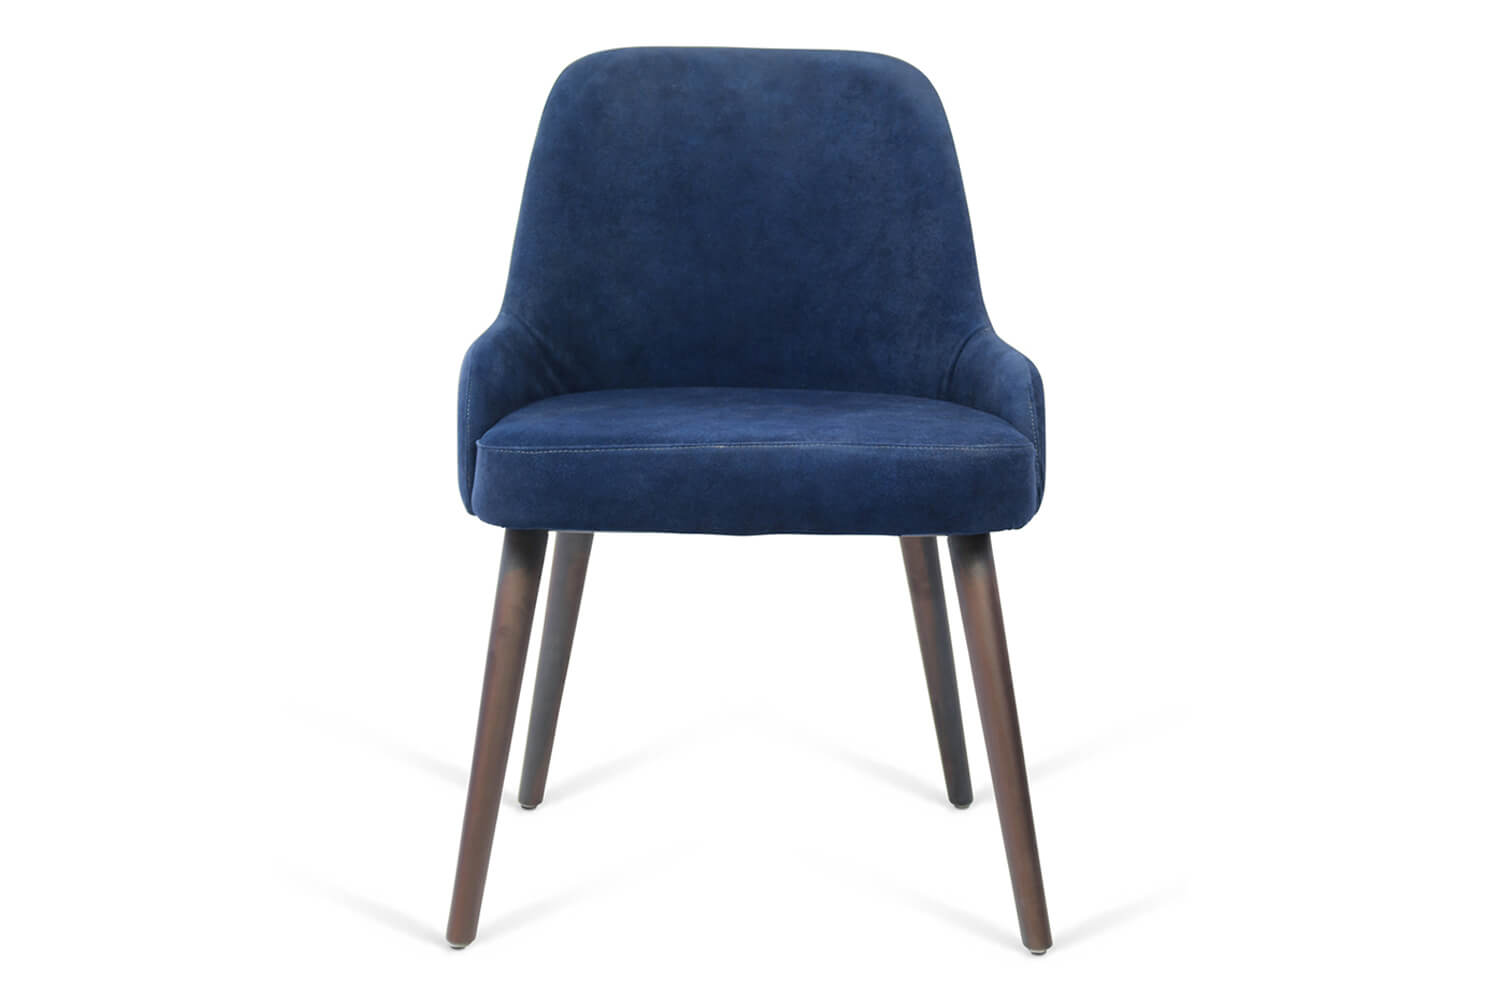 Geneva Low Armchair | Low Profile Lounge Chair | Table Place Chairs